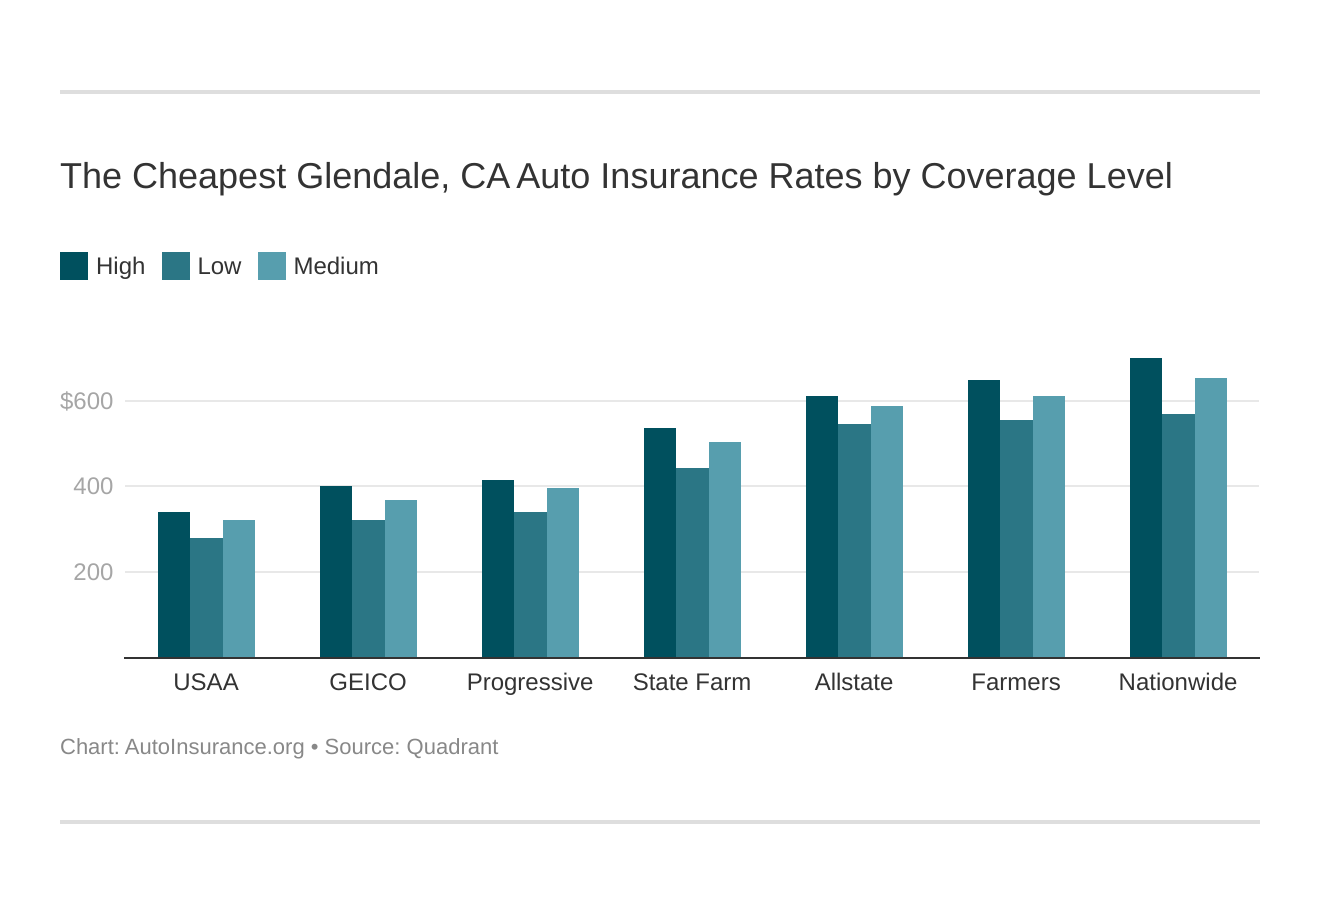 The Cheapest Glendale, CA Auto Insurance Rates by Coverage Level